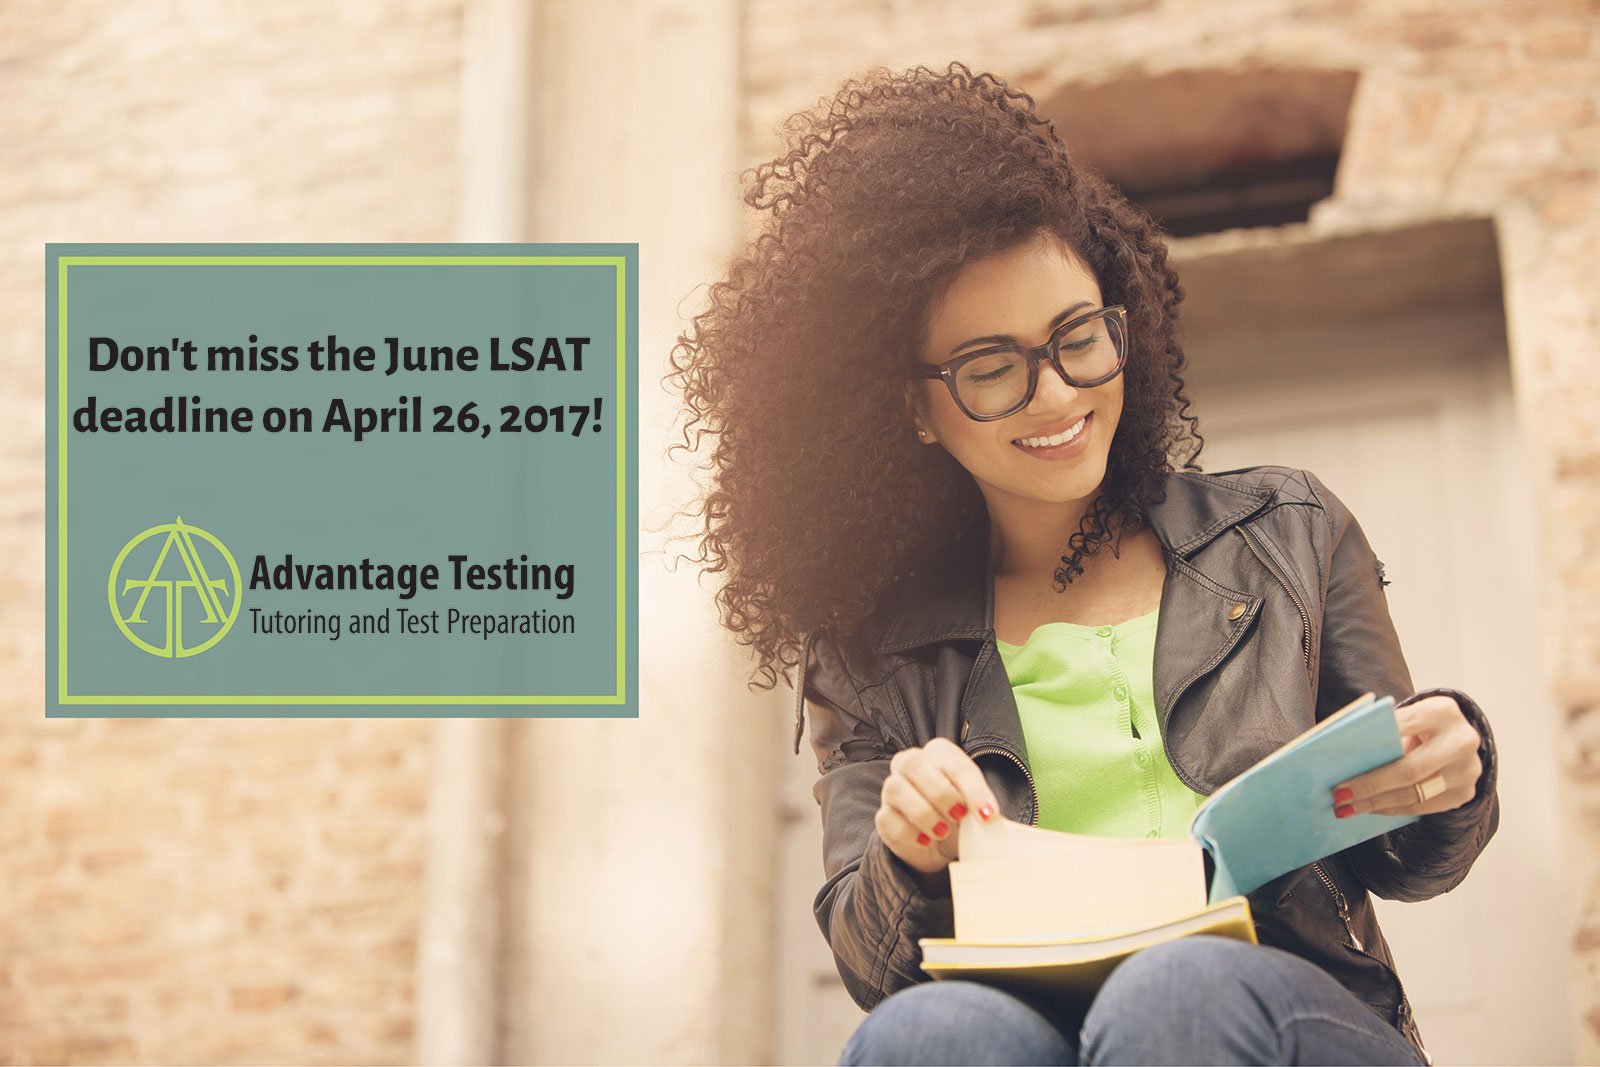 Don’t forget to register for the June LSAT by April 26